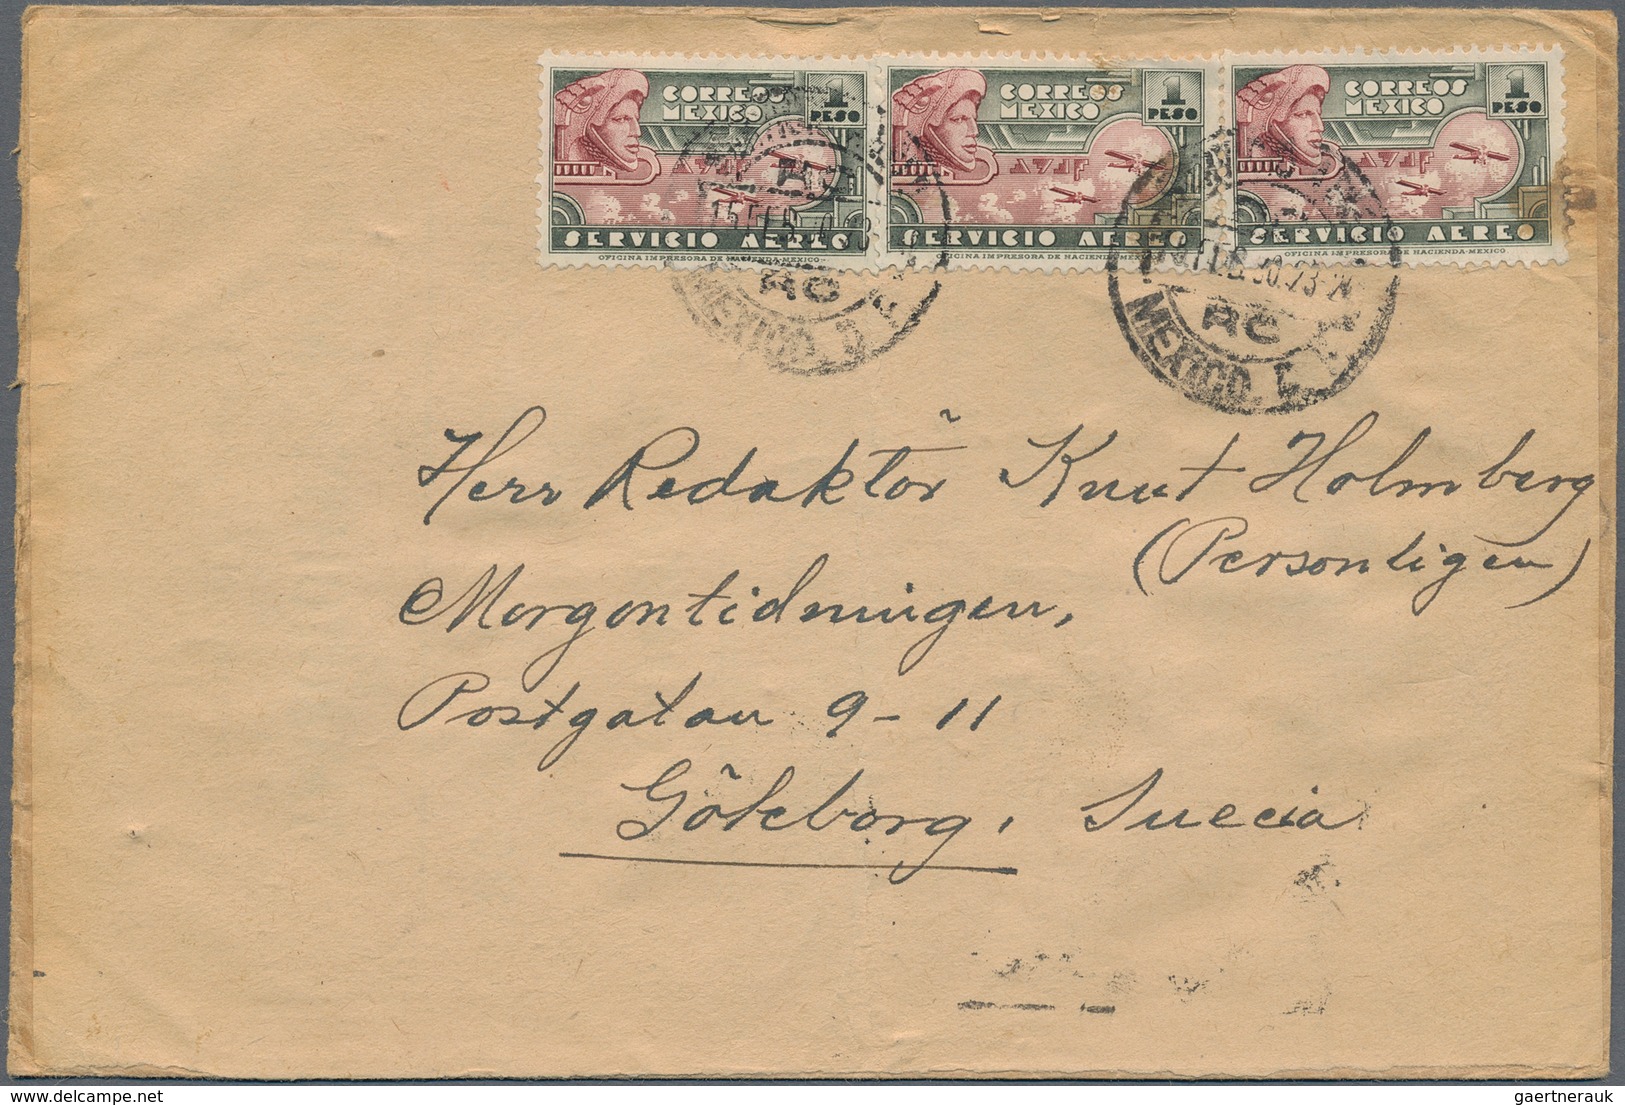 Mexiko - Ganzsachen: 1899/1981, ca. 64 covers/used ppc mostly to Europe or USA inc. censorship and r